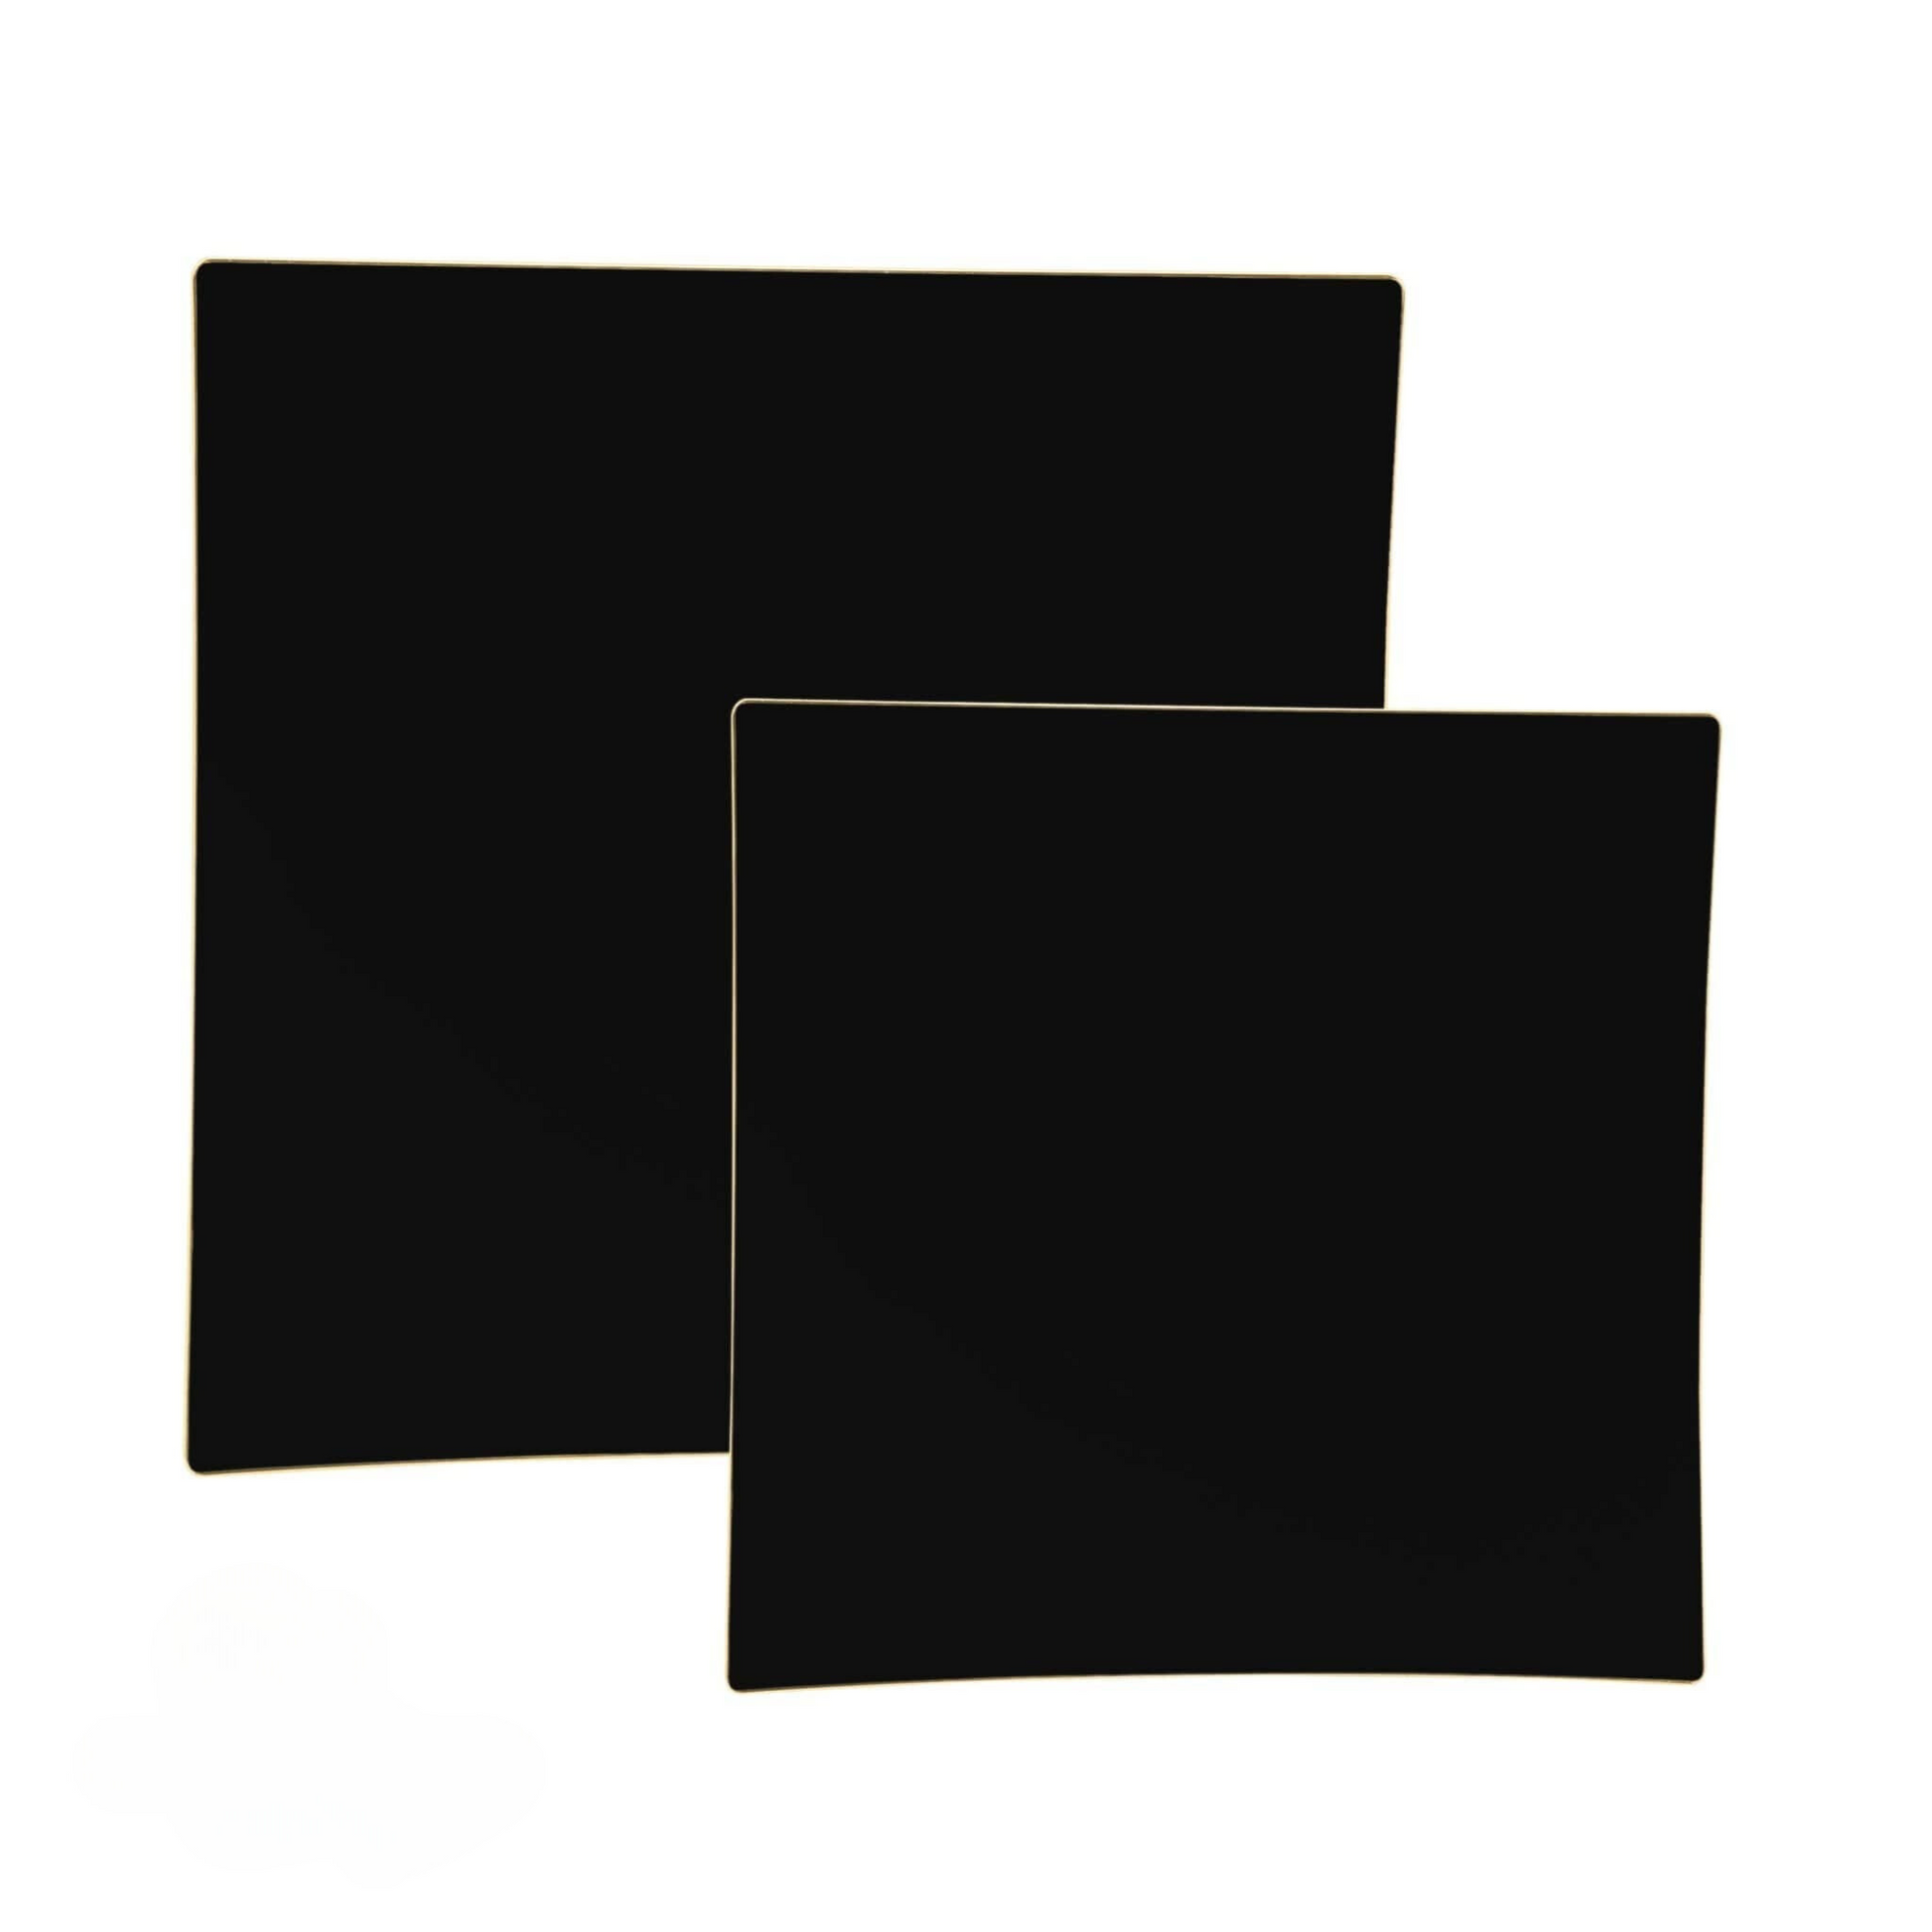 square shaped black and gold plastic dinner plates